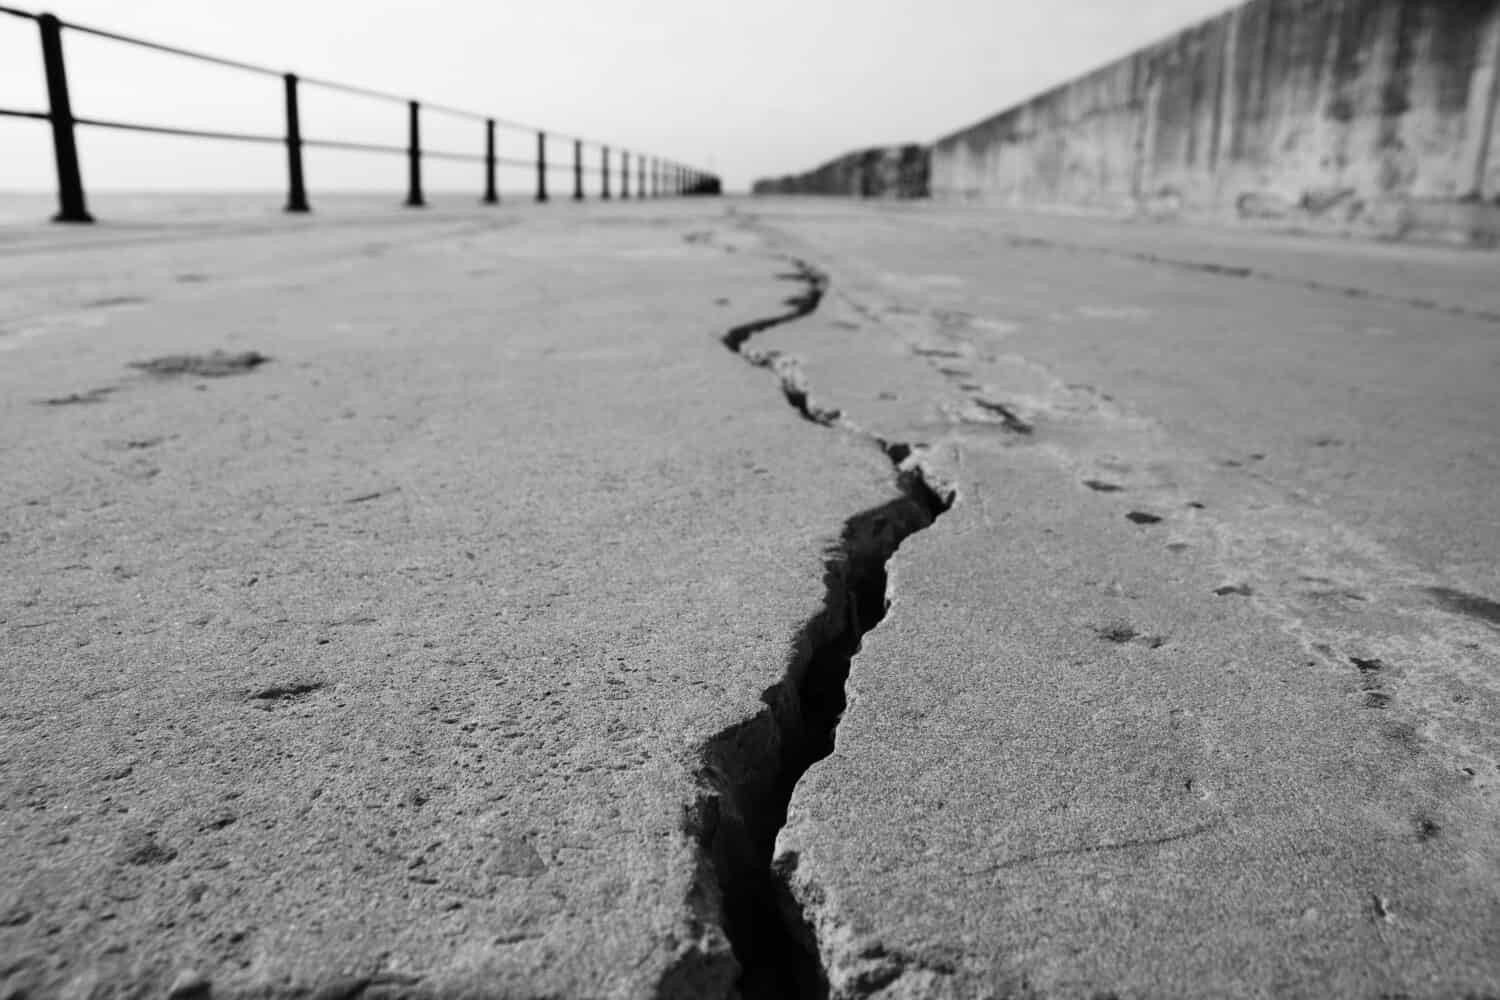 A large crack in concrete. Earthquake concept photo. This picture has selective focus.